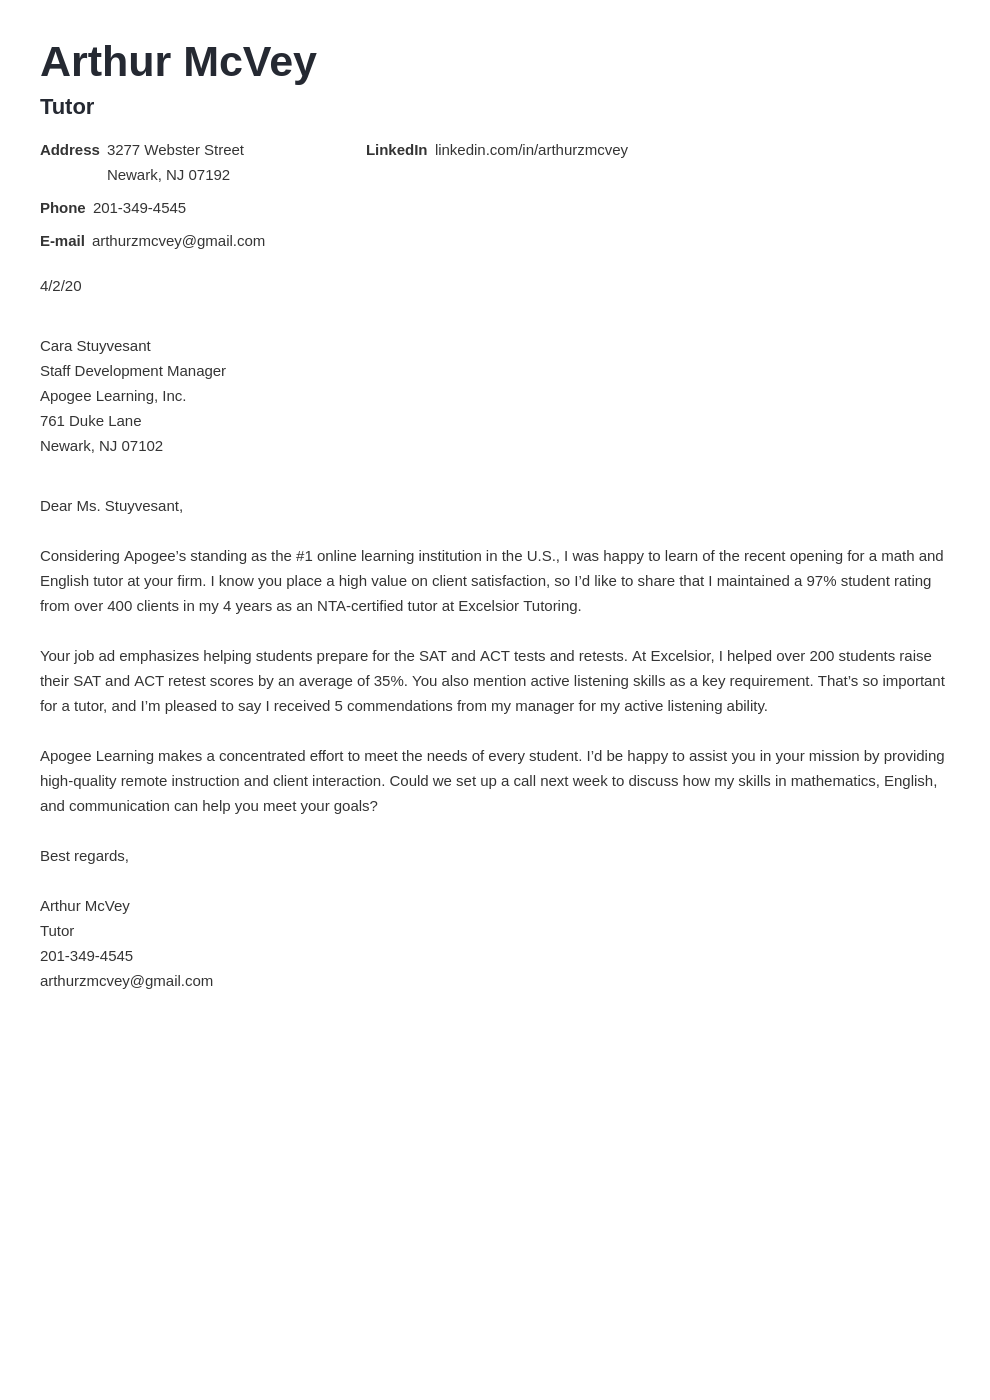 How To Write A Formal Cover Letter: Examples, Format & Guide